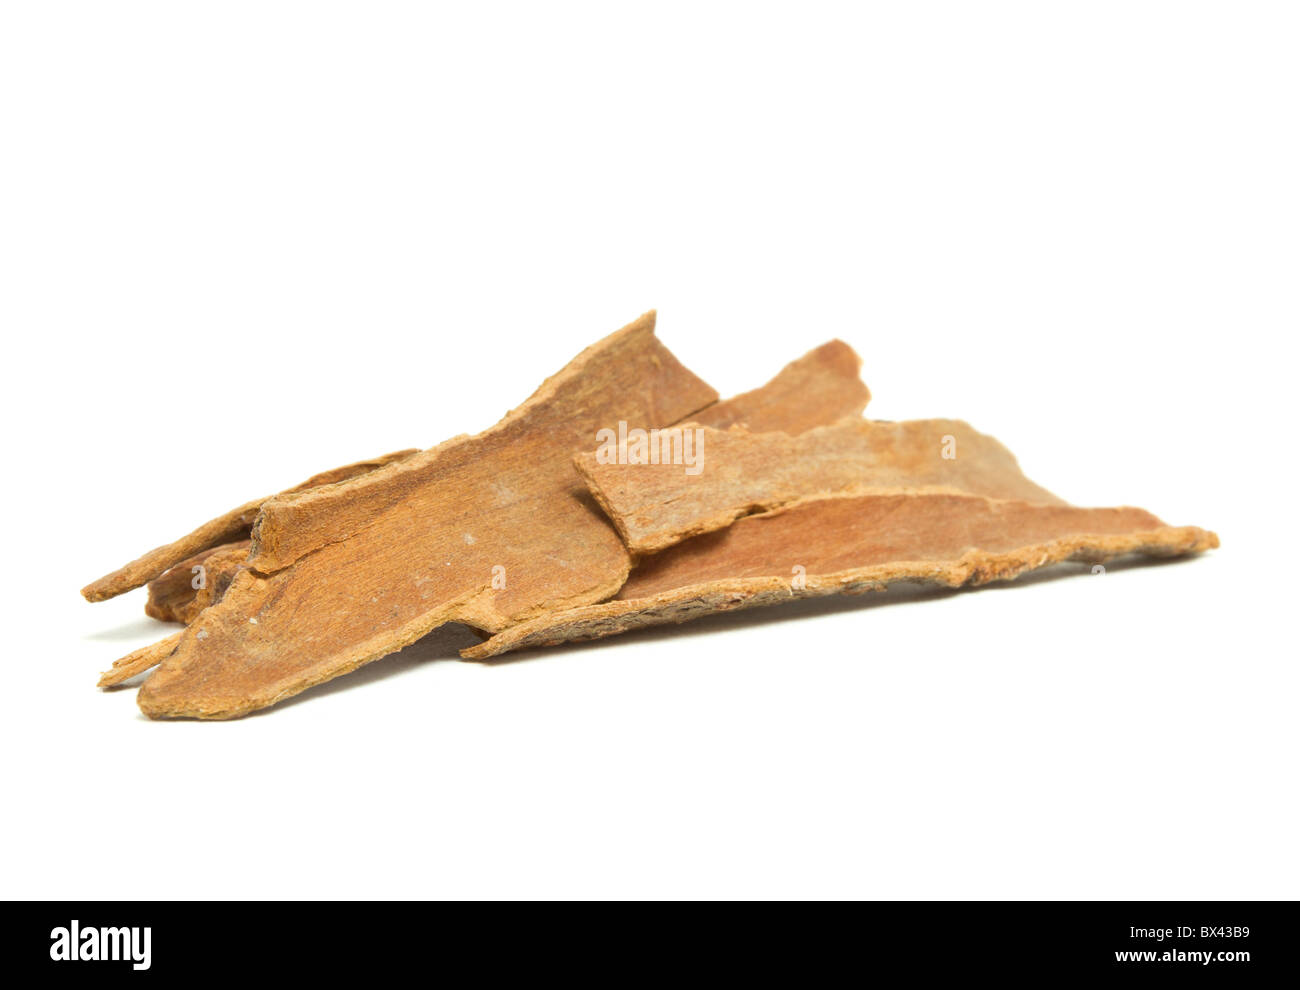 Pile of Cinnamon bark from low perspective isolated on white background. Stock Photo